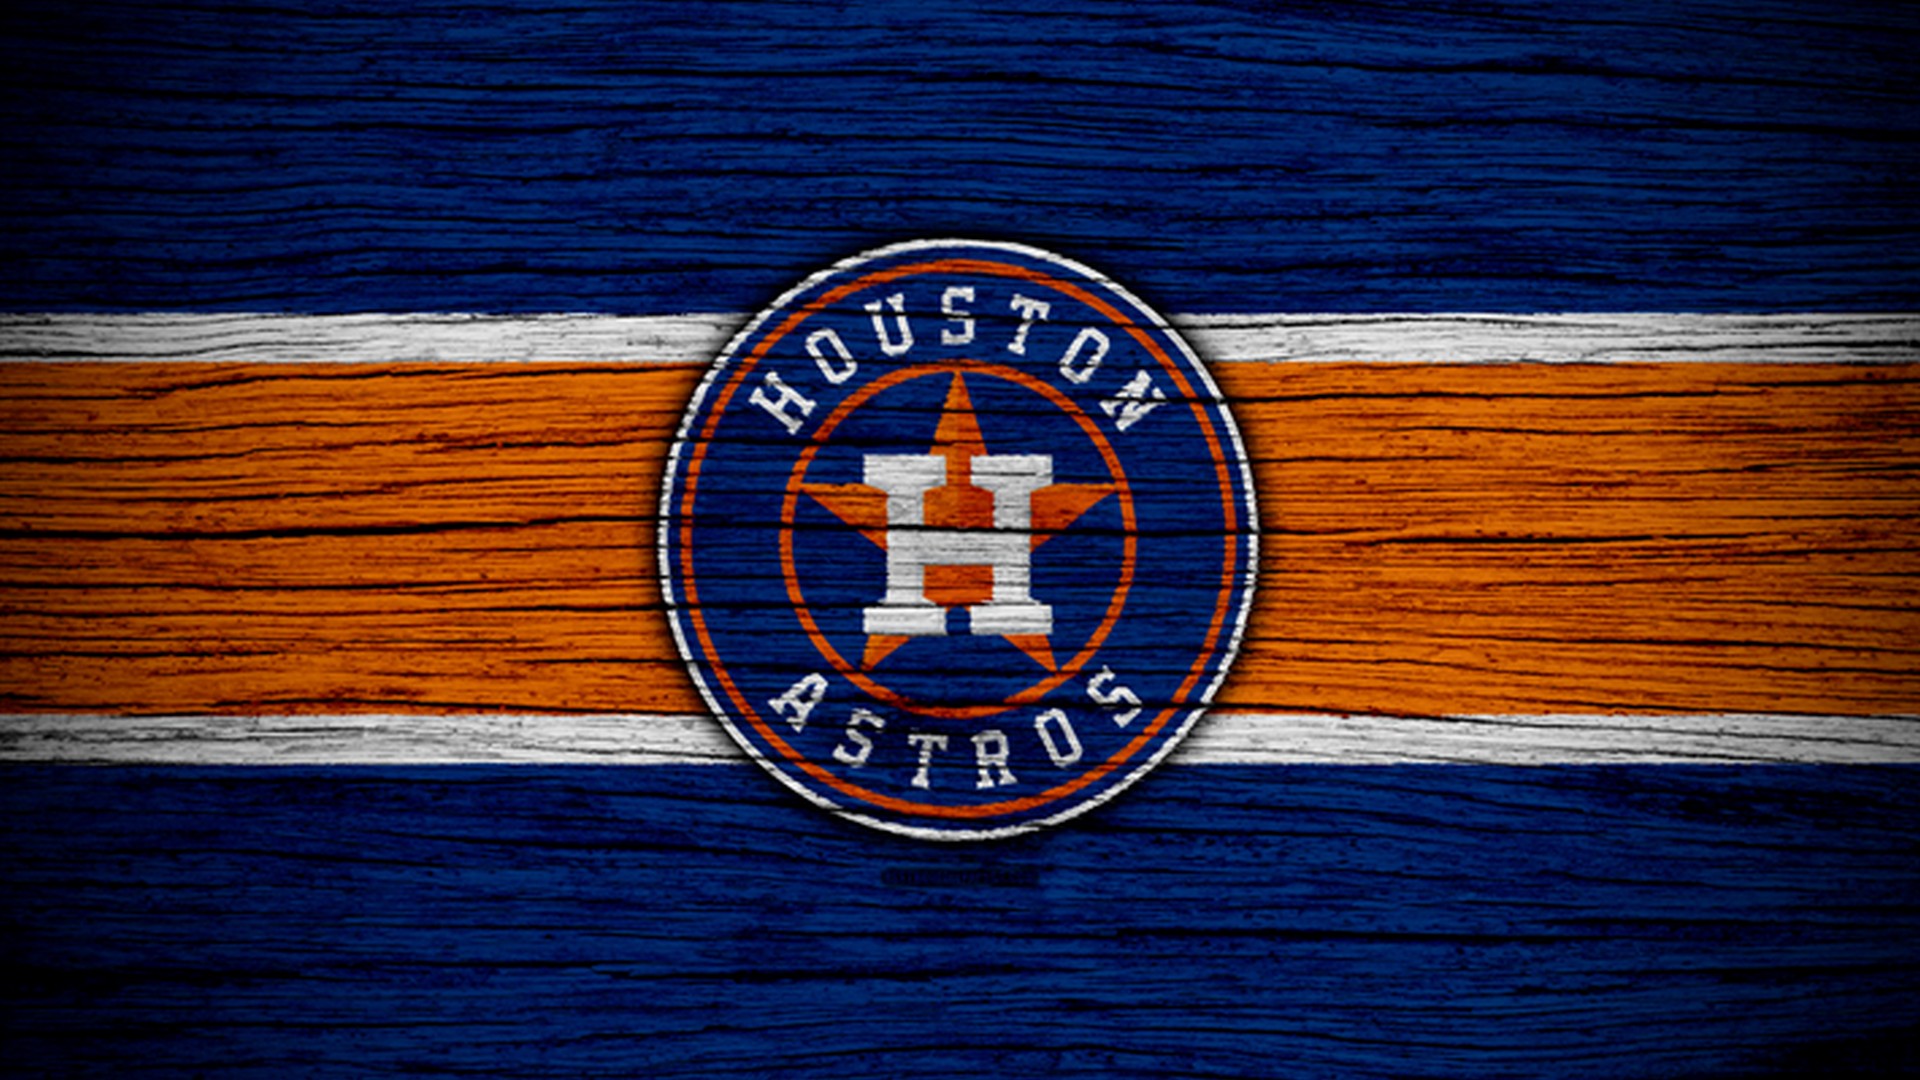 Houston Astros Wallpaper For Mac with high-resolution 1920x1080 pixel. You can use this wallpaper for Mac Desktop Wallpaper, Laptop Screensavers, Android Wallpapers, Tablet or iPhone Home Screen and another mobile phone device